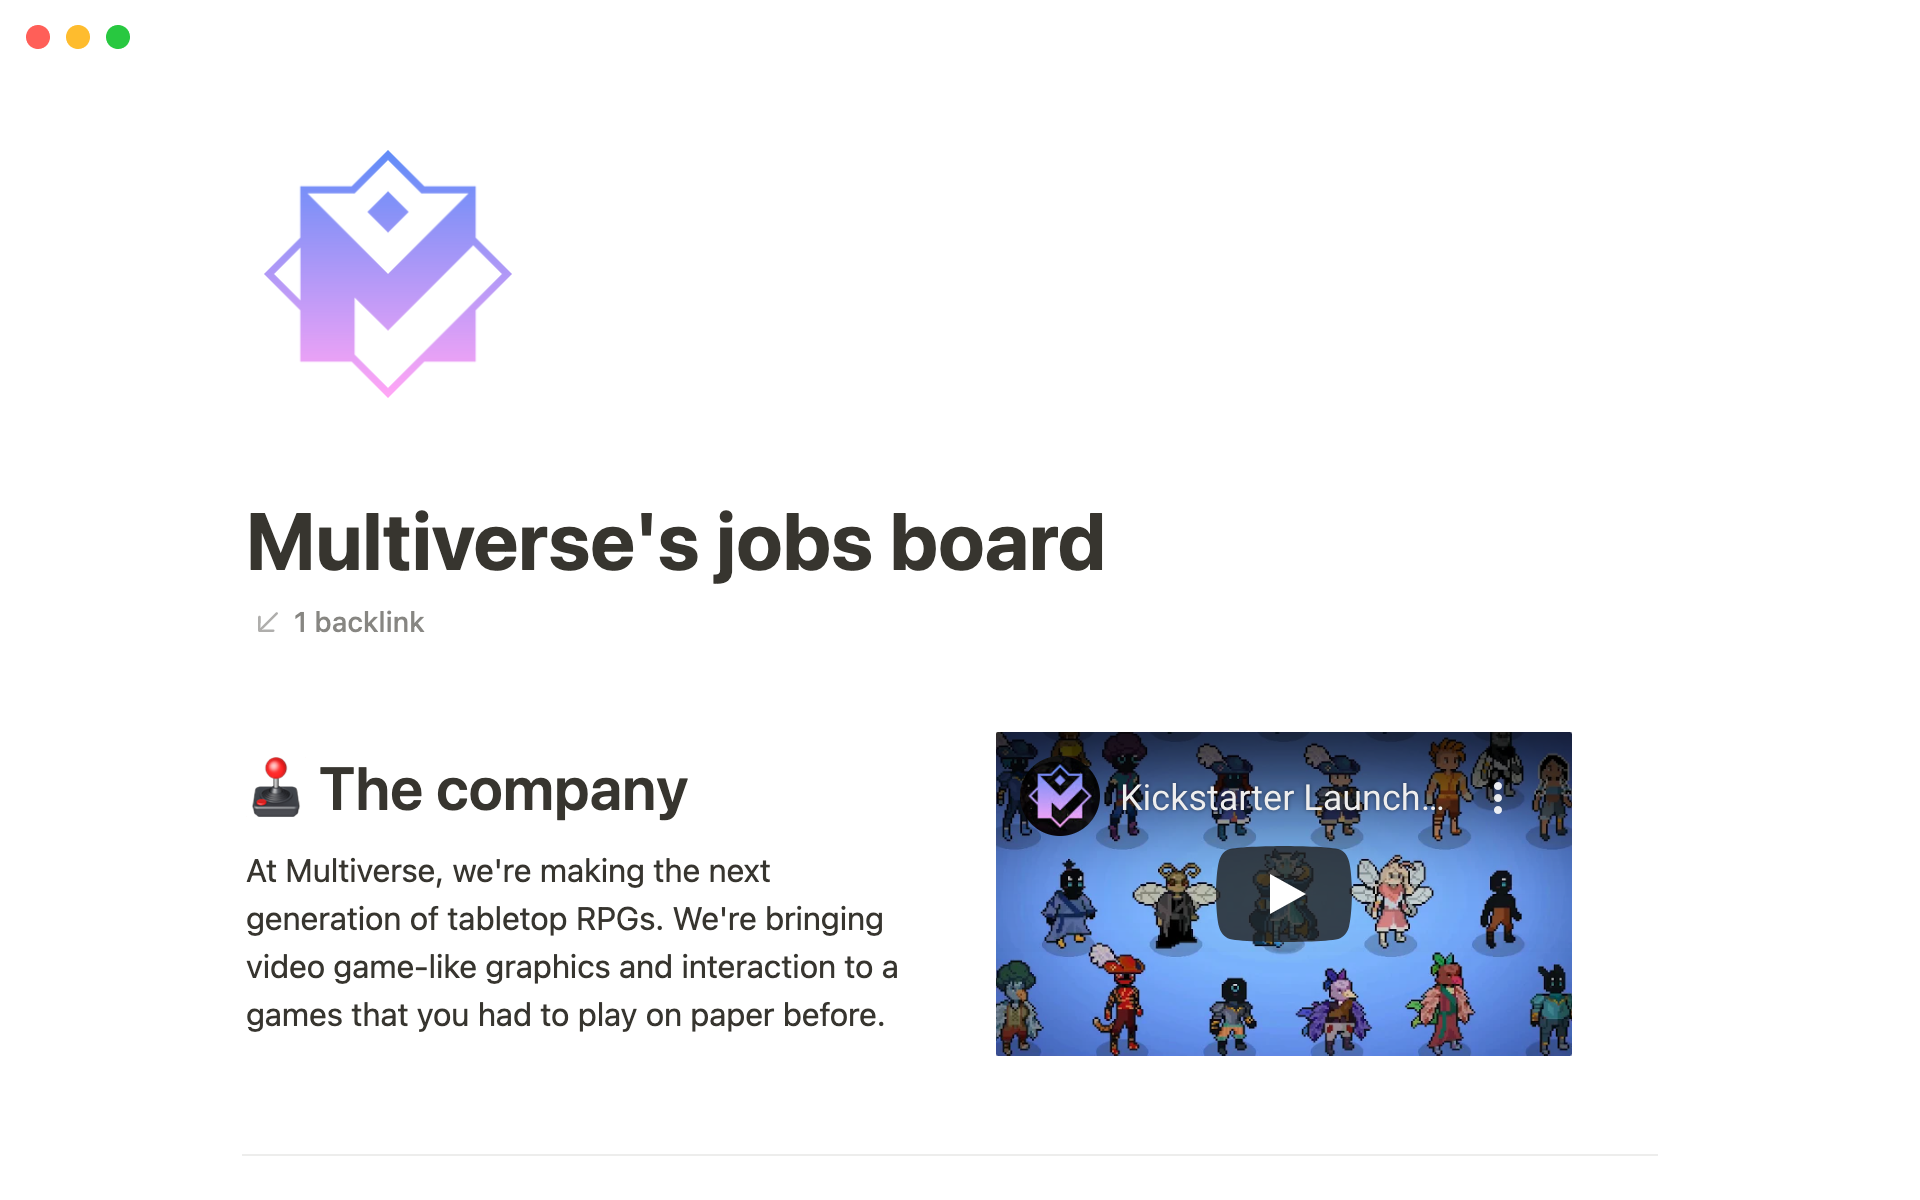 The desktop image for the Multiverse's jobs board template